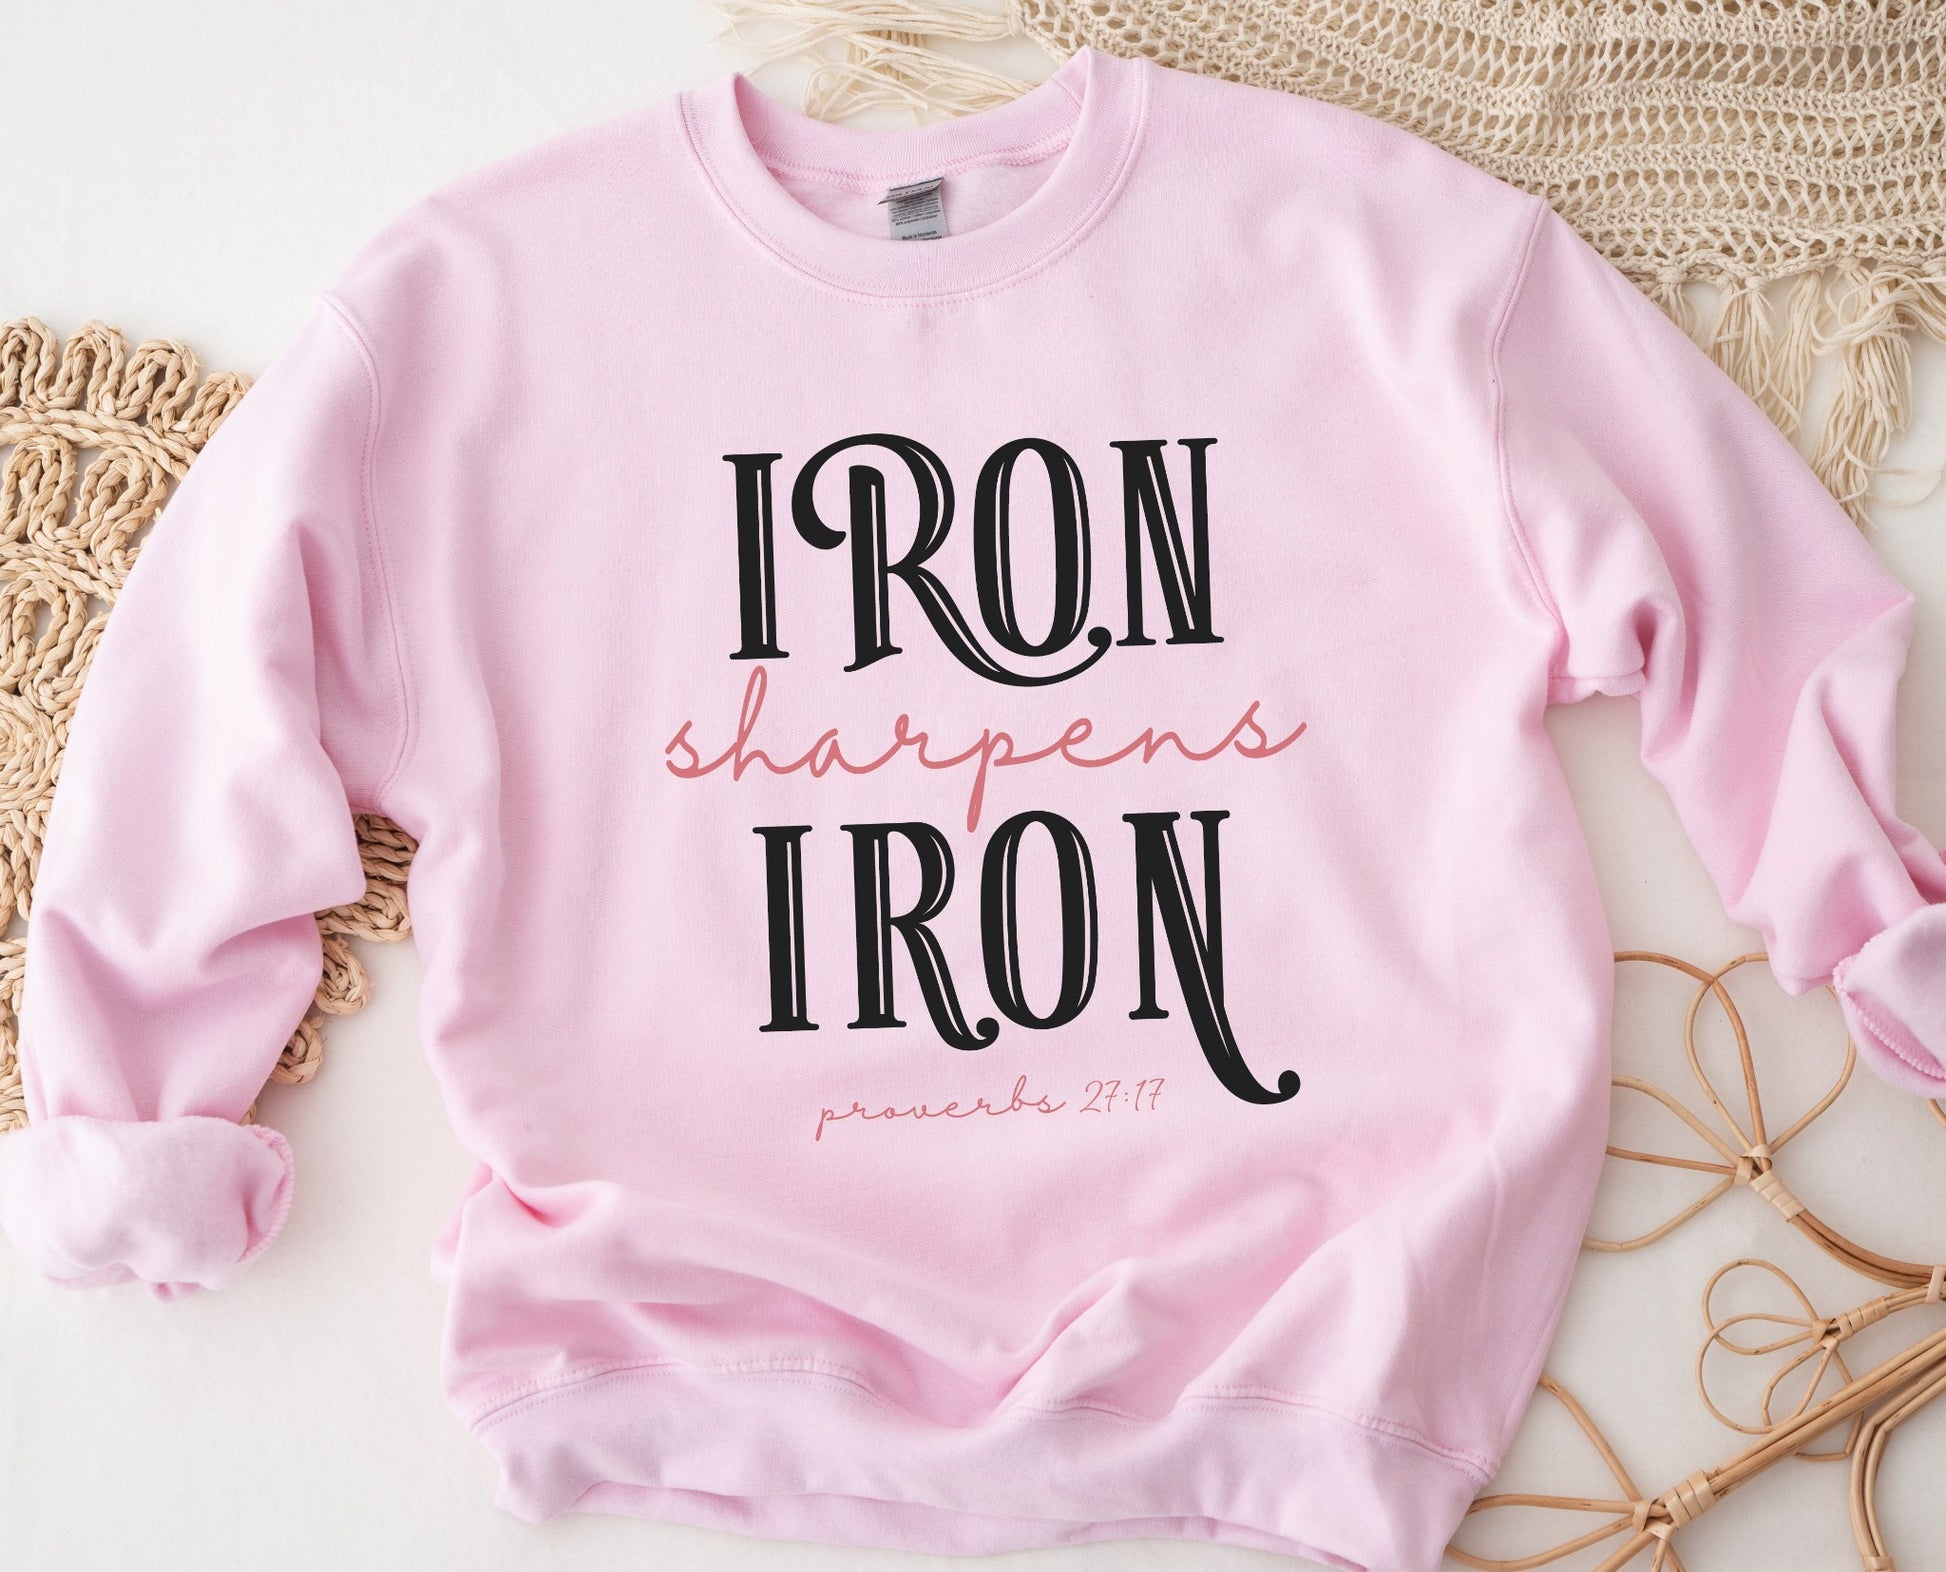 Iron Sharpens Iron Proverbs 27:17 Christian aesthetic design printed in black and mauve on cozy light pink unisex crewneck sweatshirt for women's groups